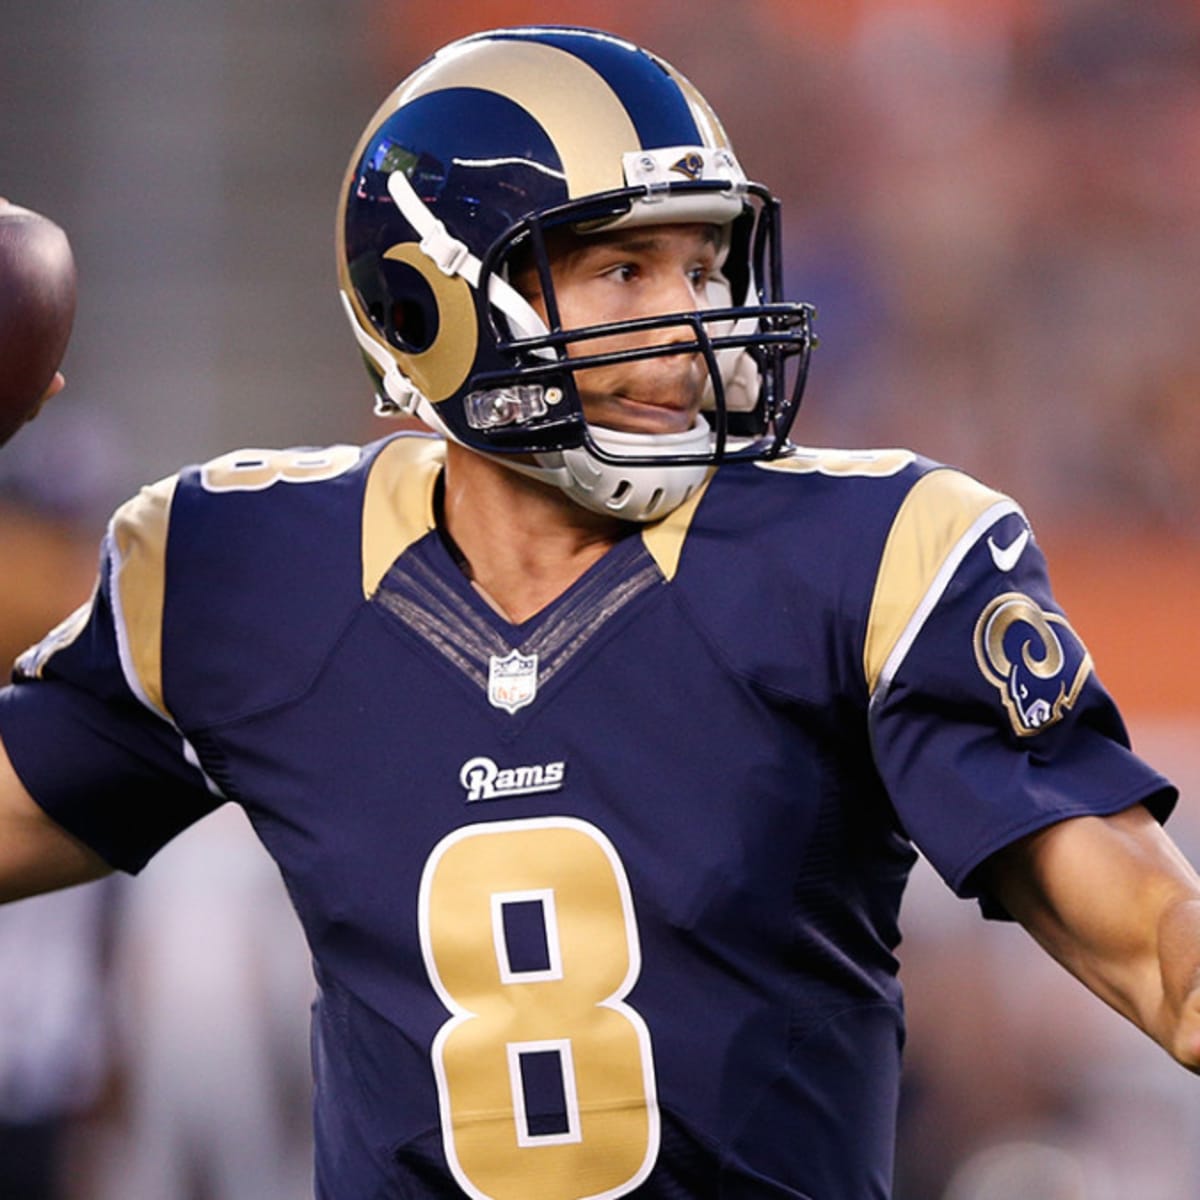 Report: No teams have contacted Rams about Sam Bradford trade